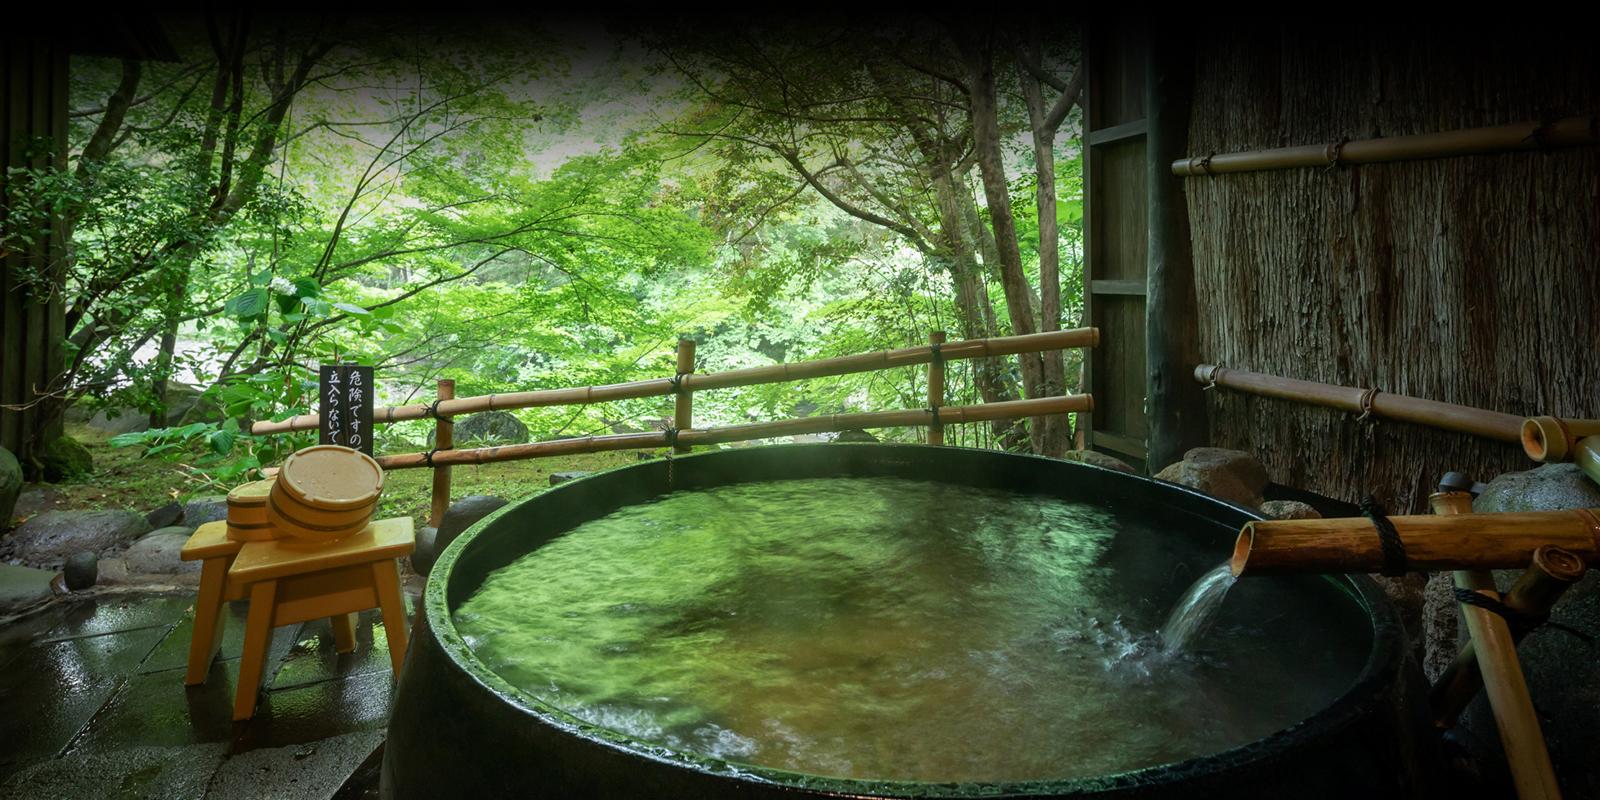 Tenganse Onsen Stay at a Ryokan with the Charm of Tenkase Onsen!